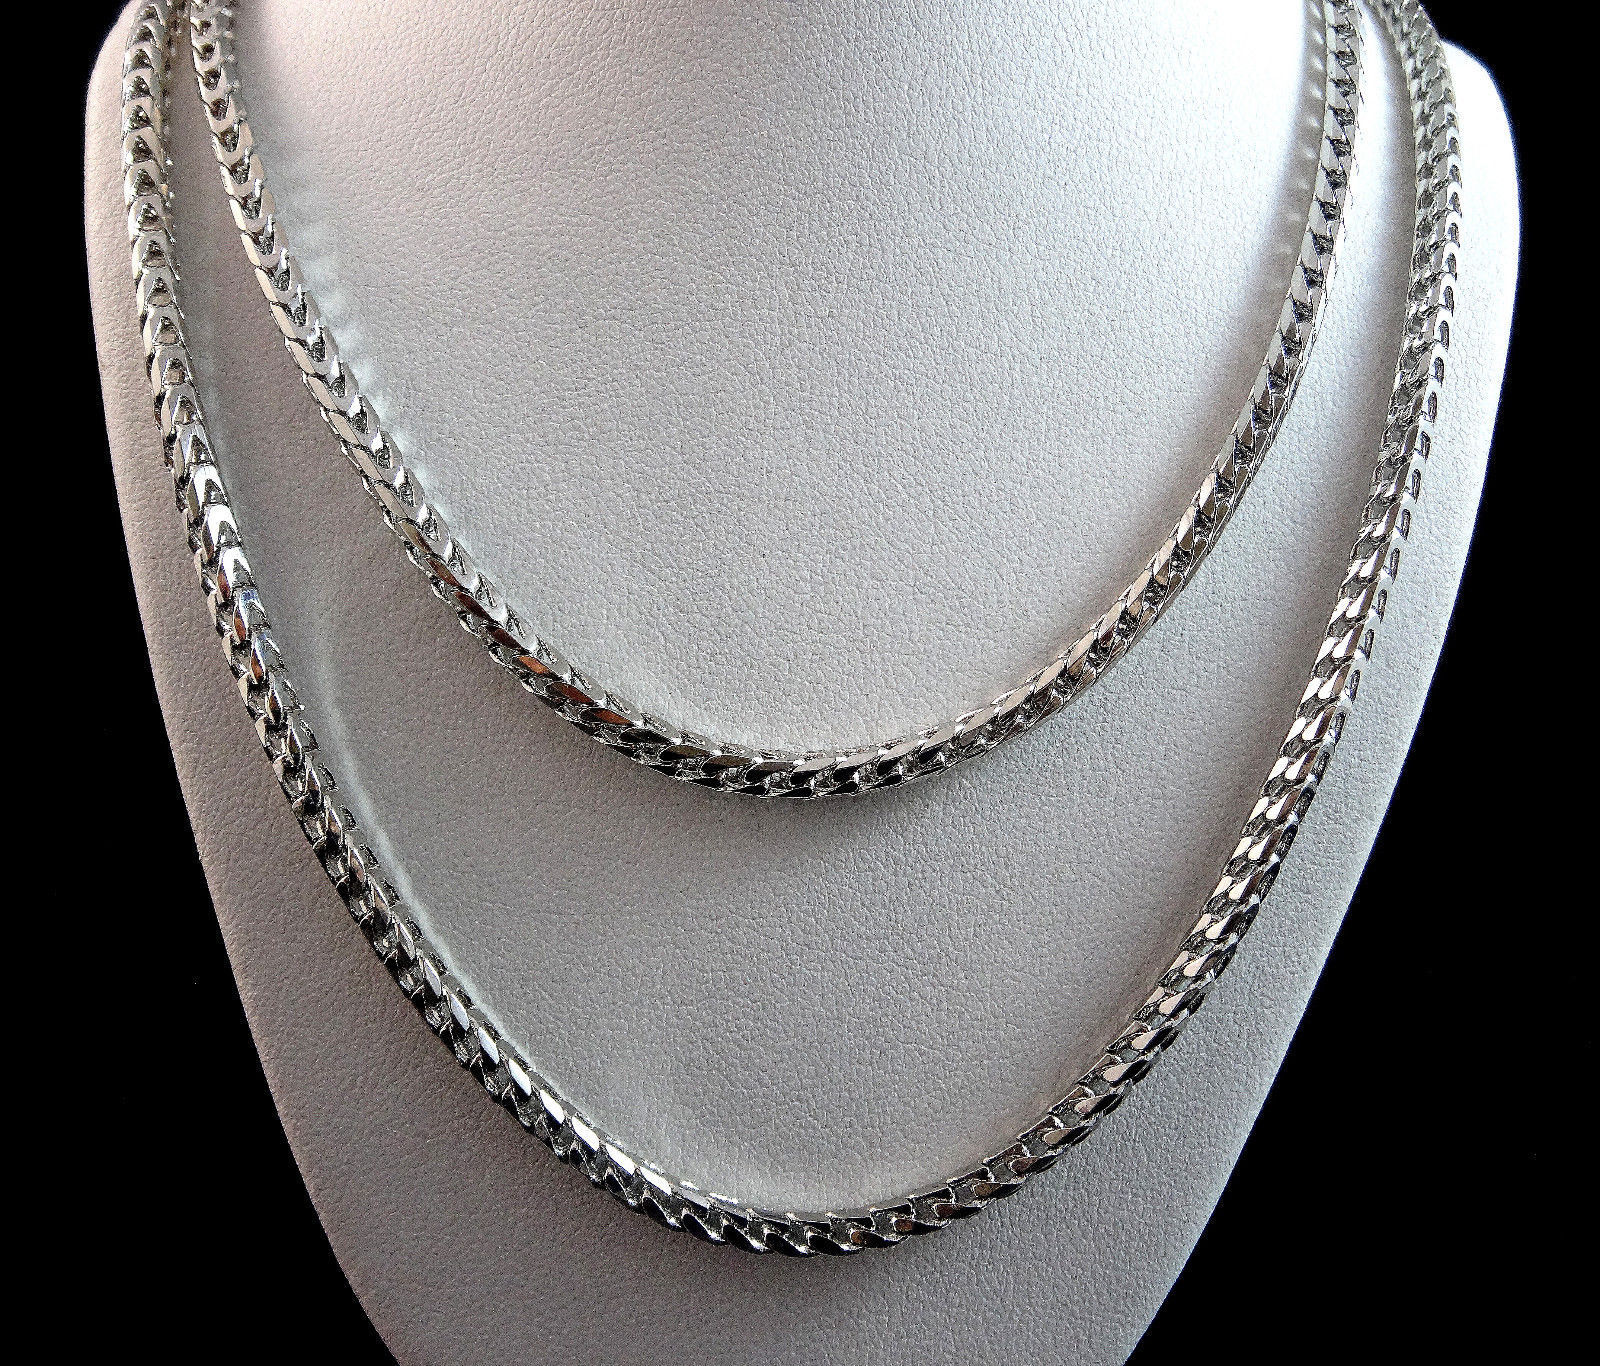 NEW WHITE GOLD FINISH MENS WOMENS HIGH QUALITY 36 INCH FRANCO NECKLESS CHAIN 4MM